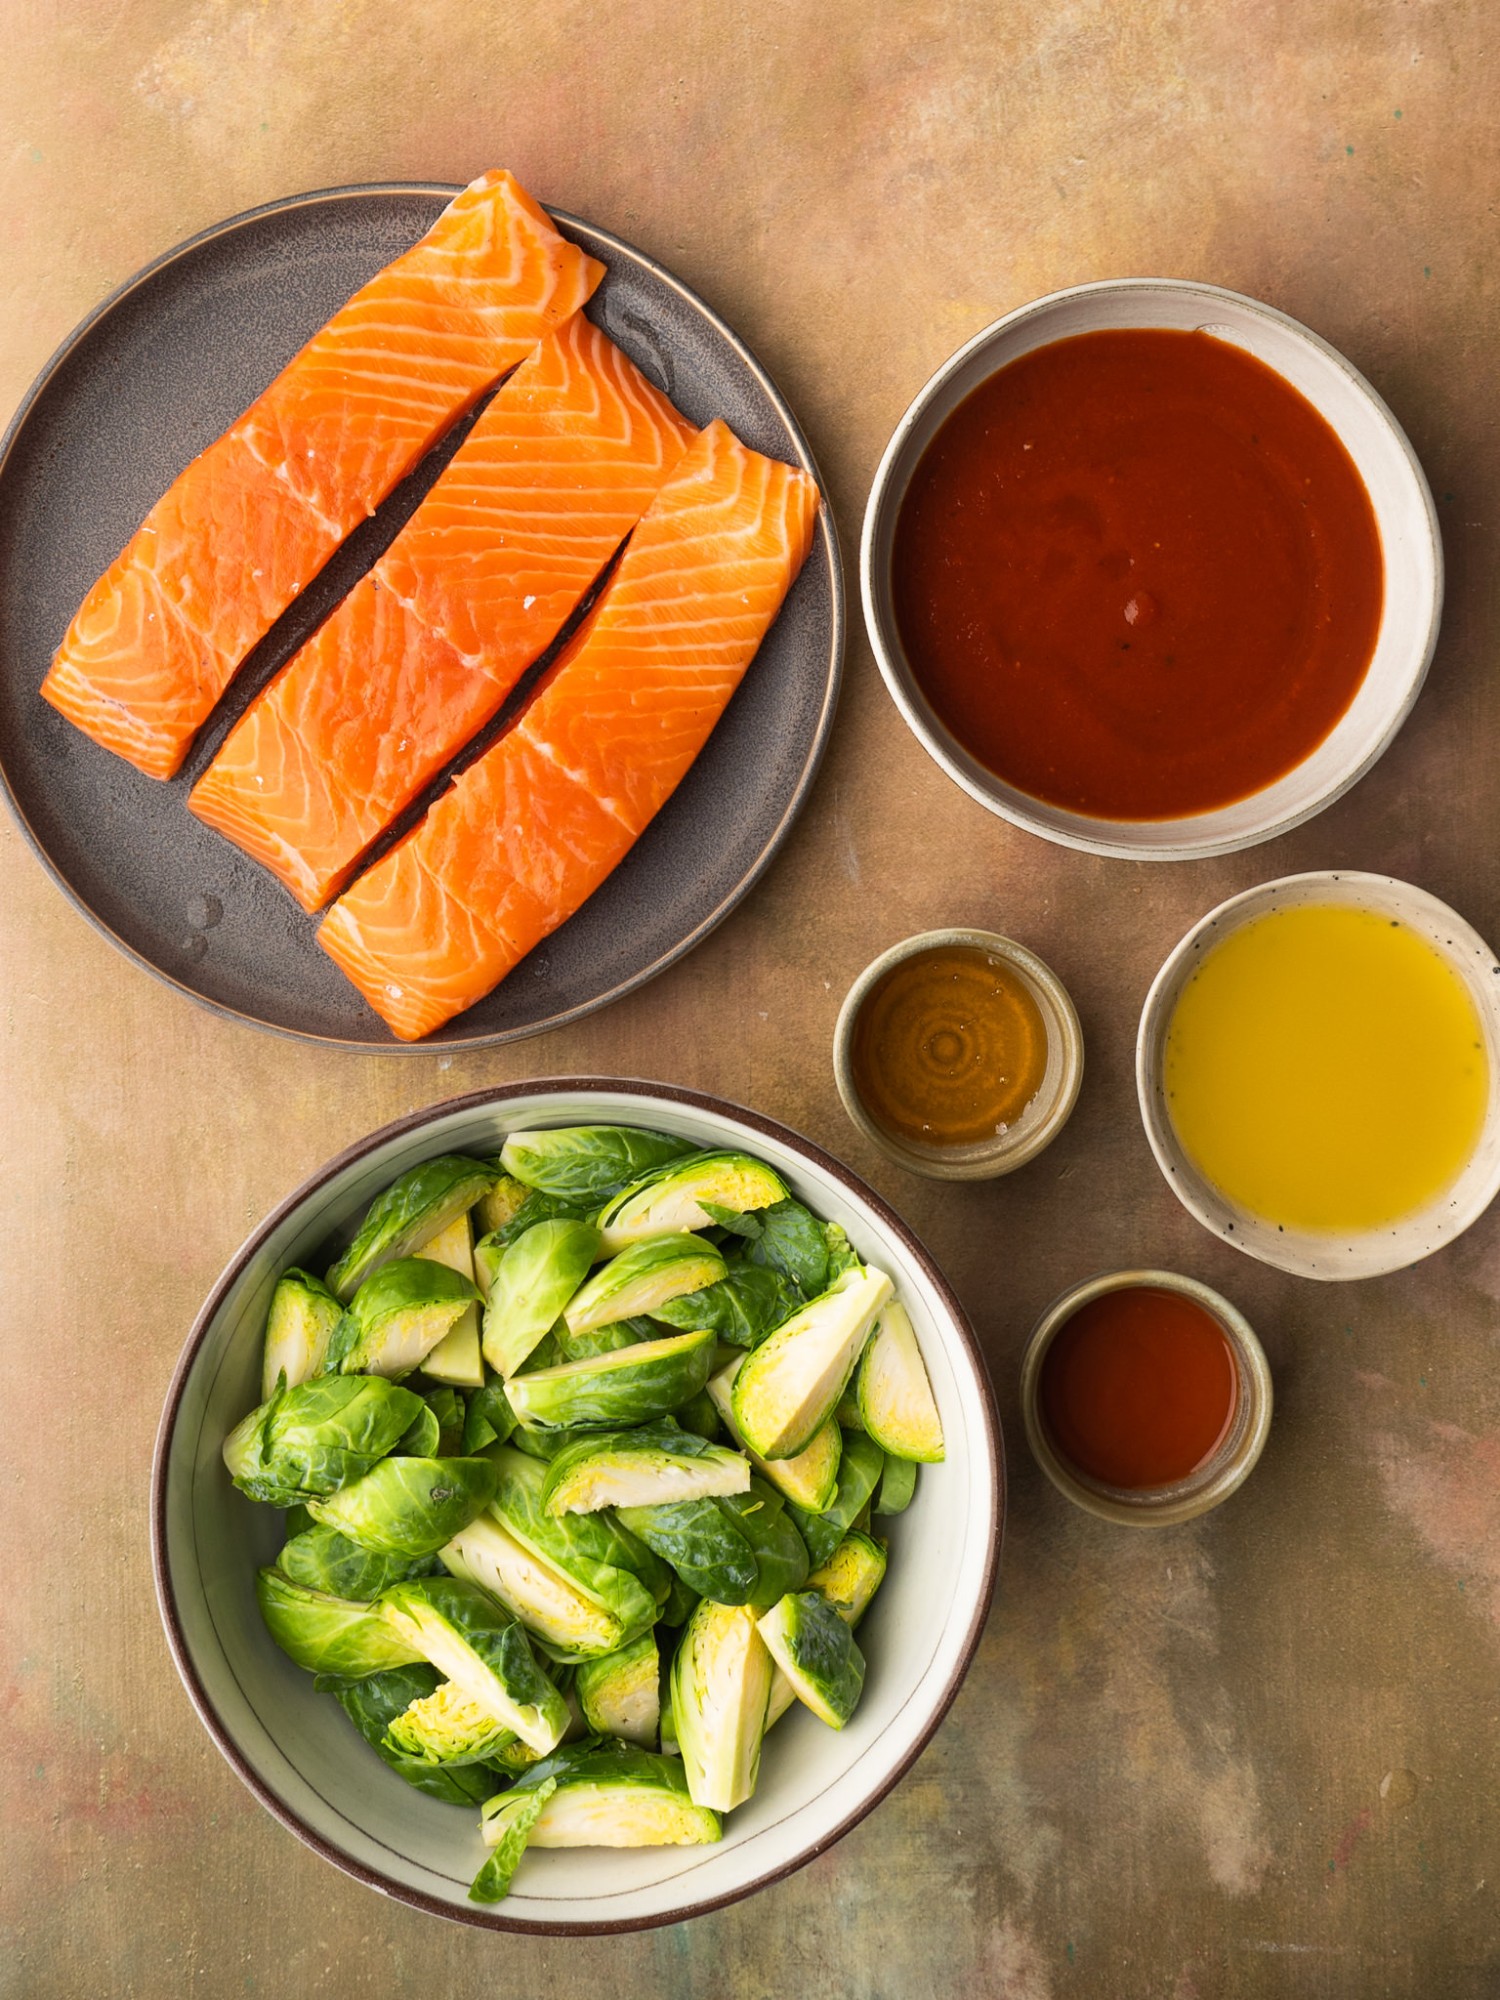 Above view of ingredients for barbecue salmon recipe